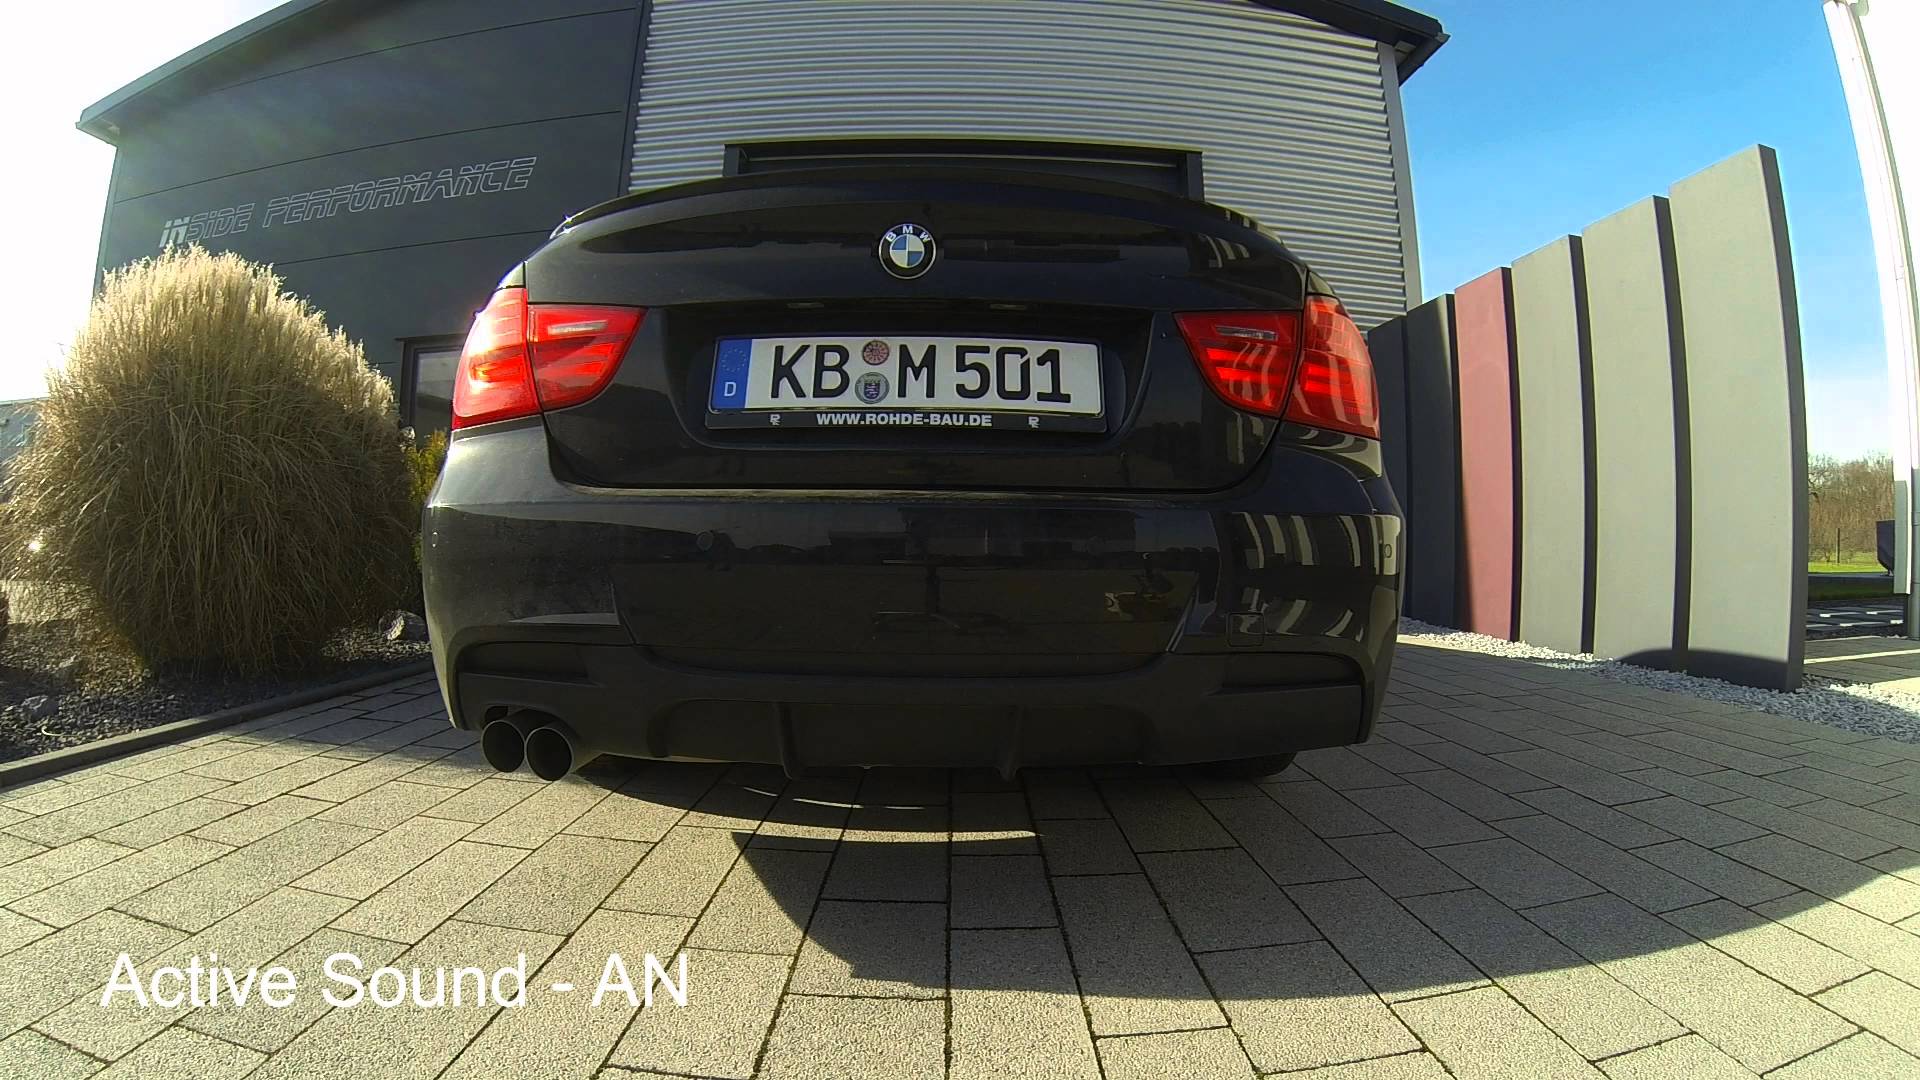 Own An E90 3 Series Diesel This Active Exhaust System Will Fix The Sound Autoevolution